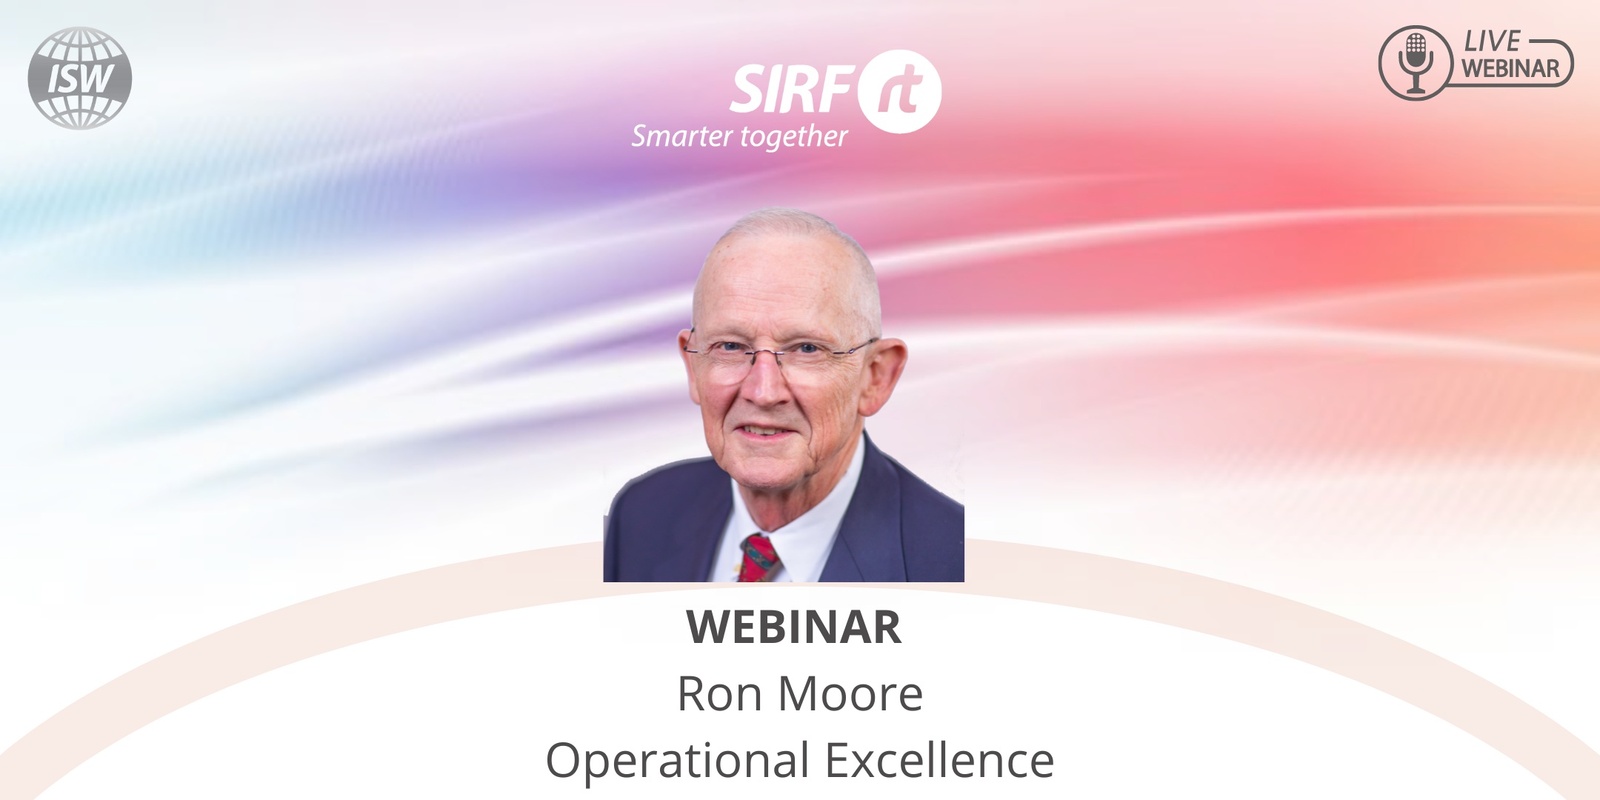 Banner image for SIRF Webinar | Ron Moore| Reliability & Operational Excellence |SIRF OERt 